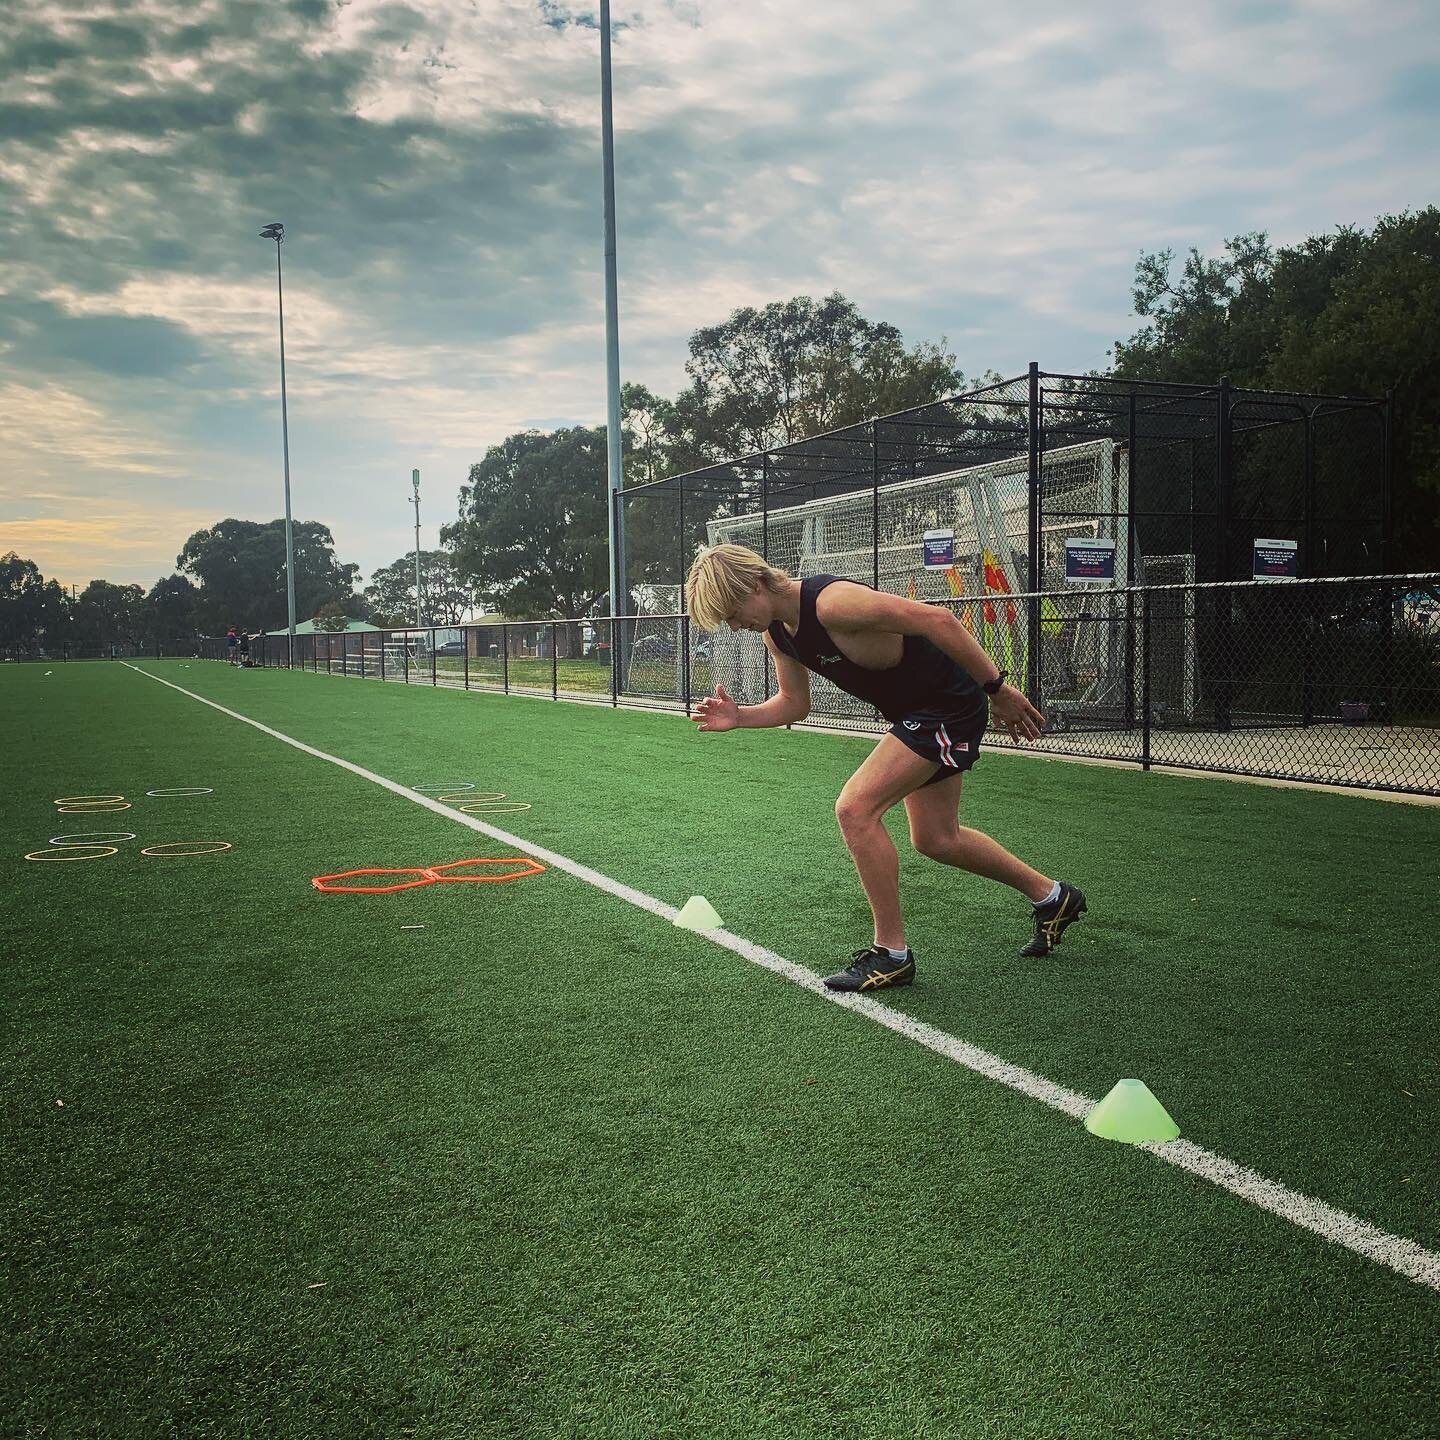 ARE YOU A TEAM SPORT ATHLETE? If you want to get faster at taking off or &ldquo;accelerating&rdquo; in your games - In training you need to VARY YOUR START POSITION. Start in different shapes and stances. You need to get good at taking of from both f